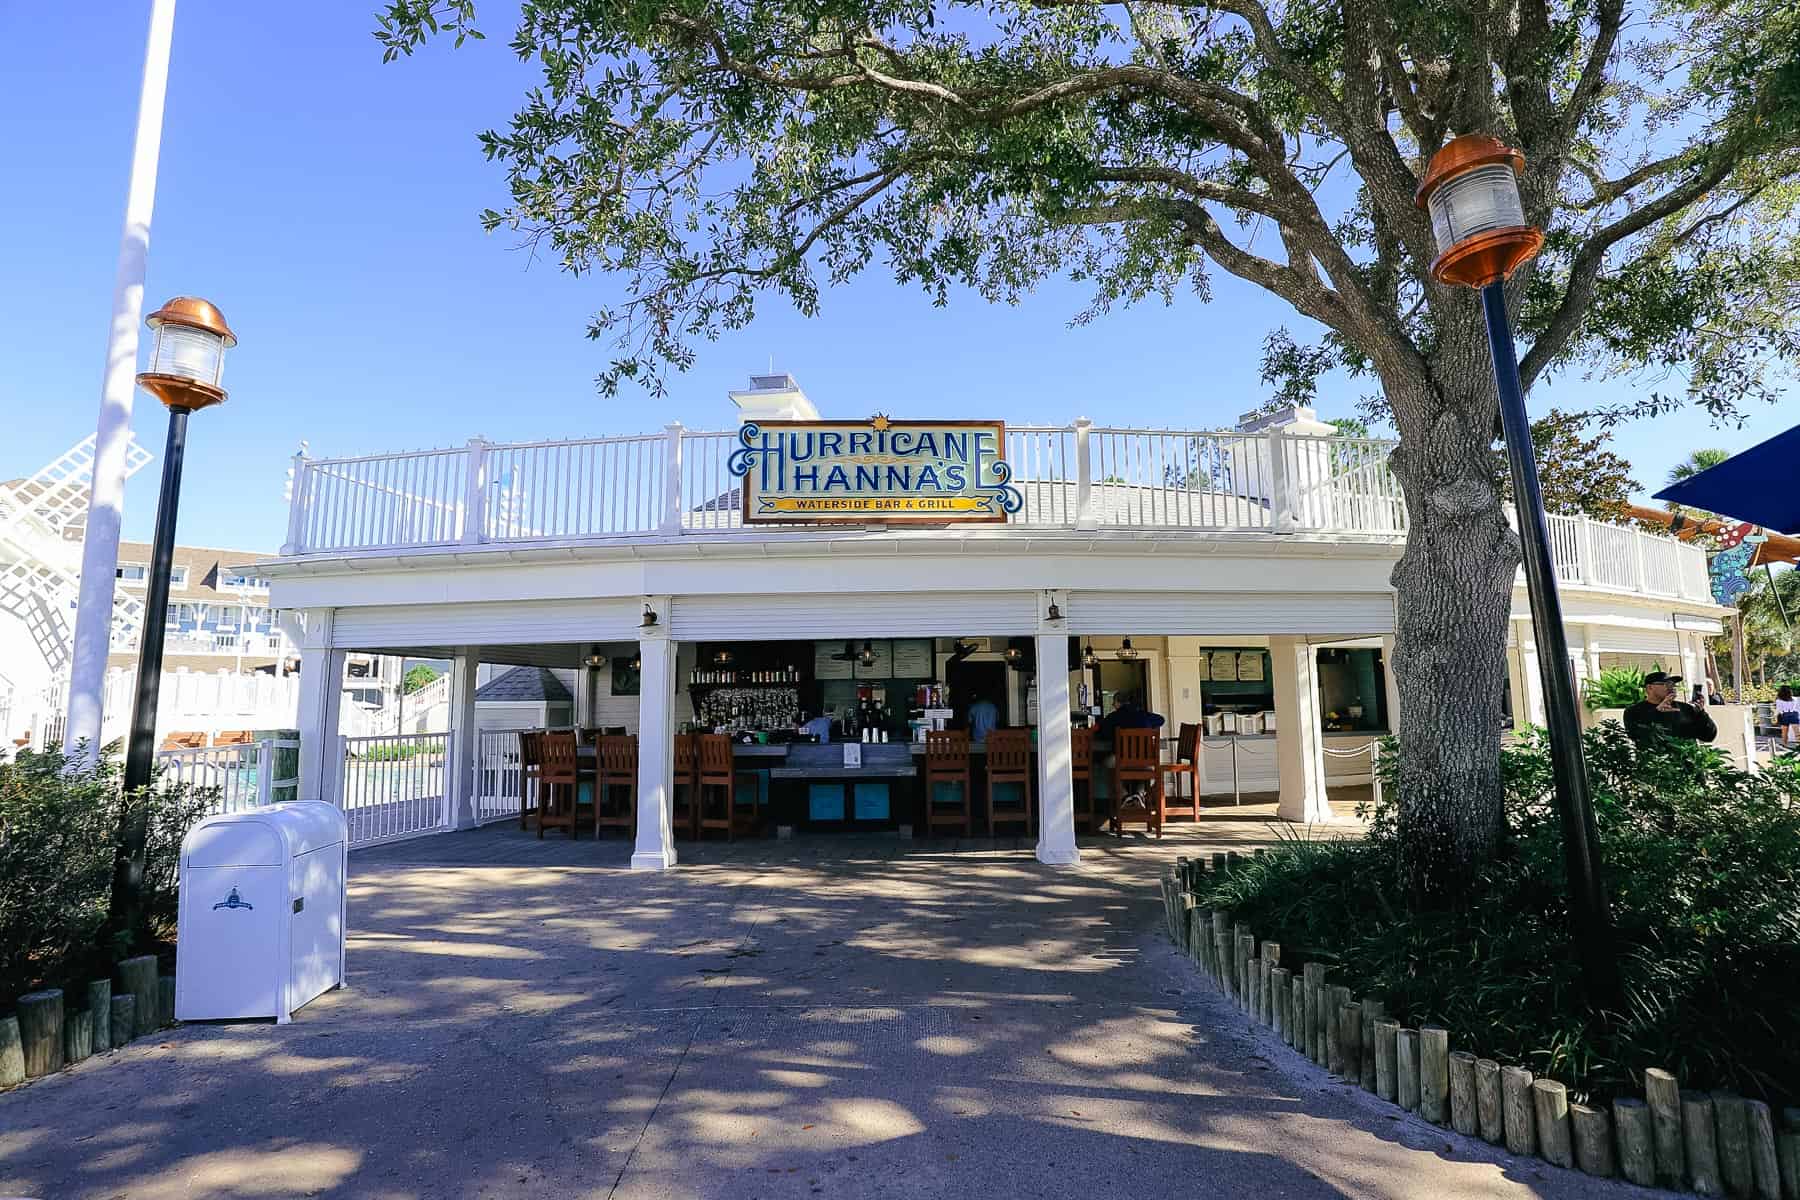 Hurricane Hanna's Waterside Bar and Grill 